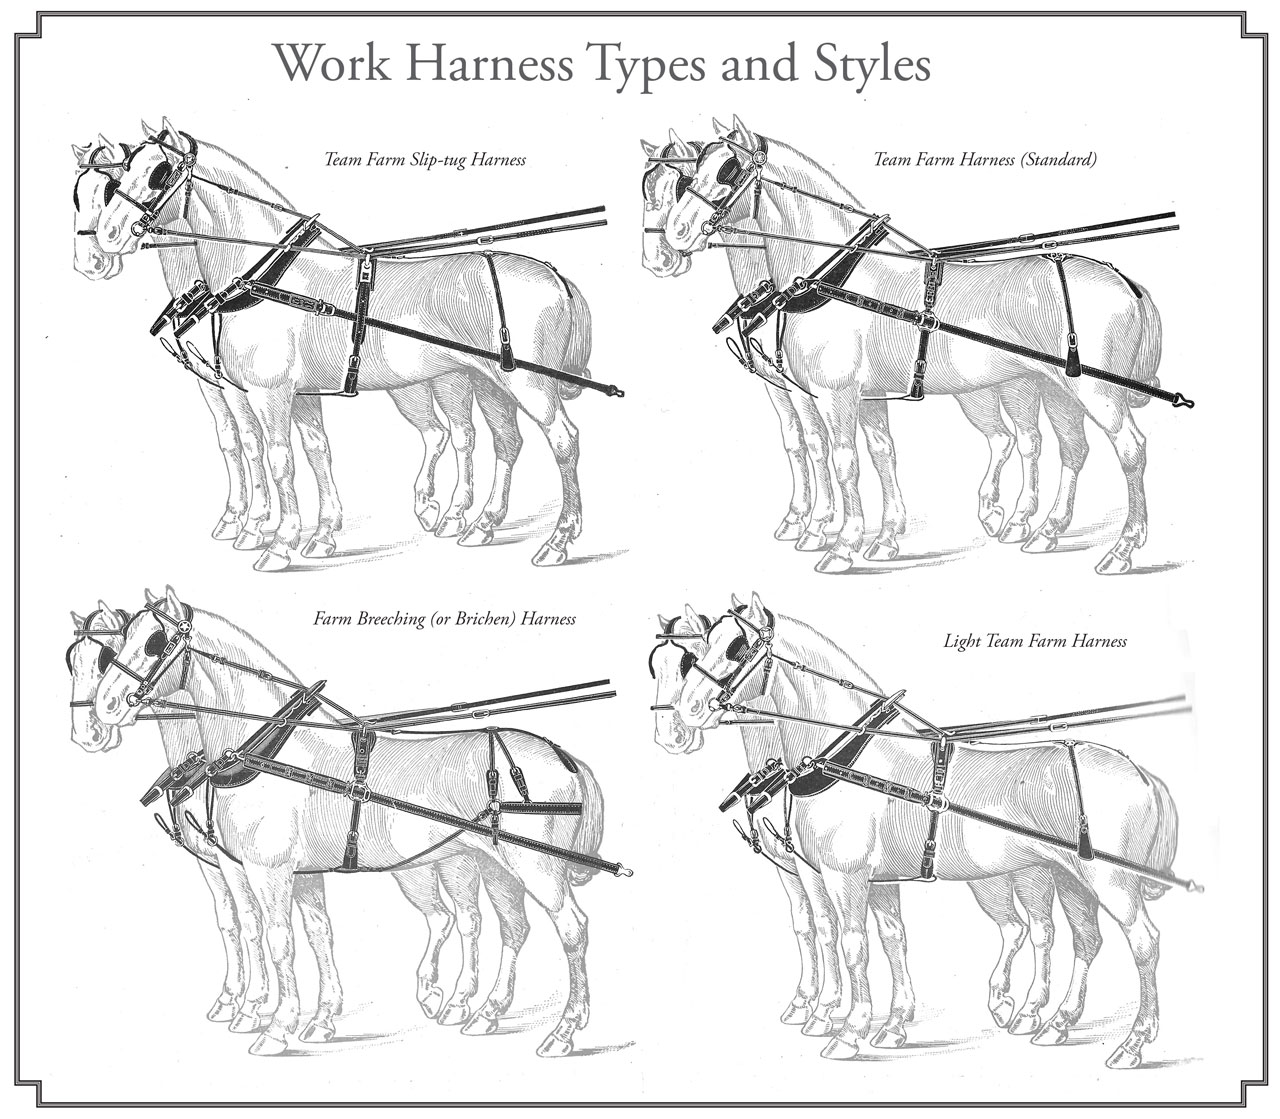 Work Harness Types and Styles